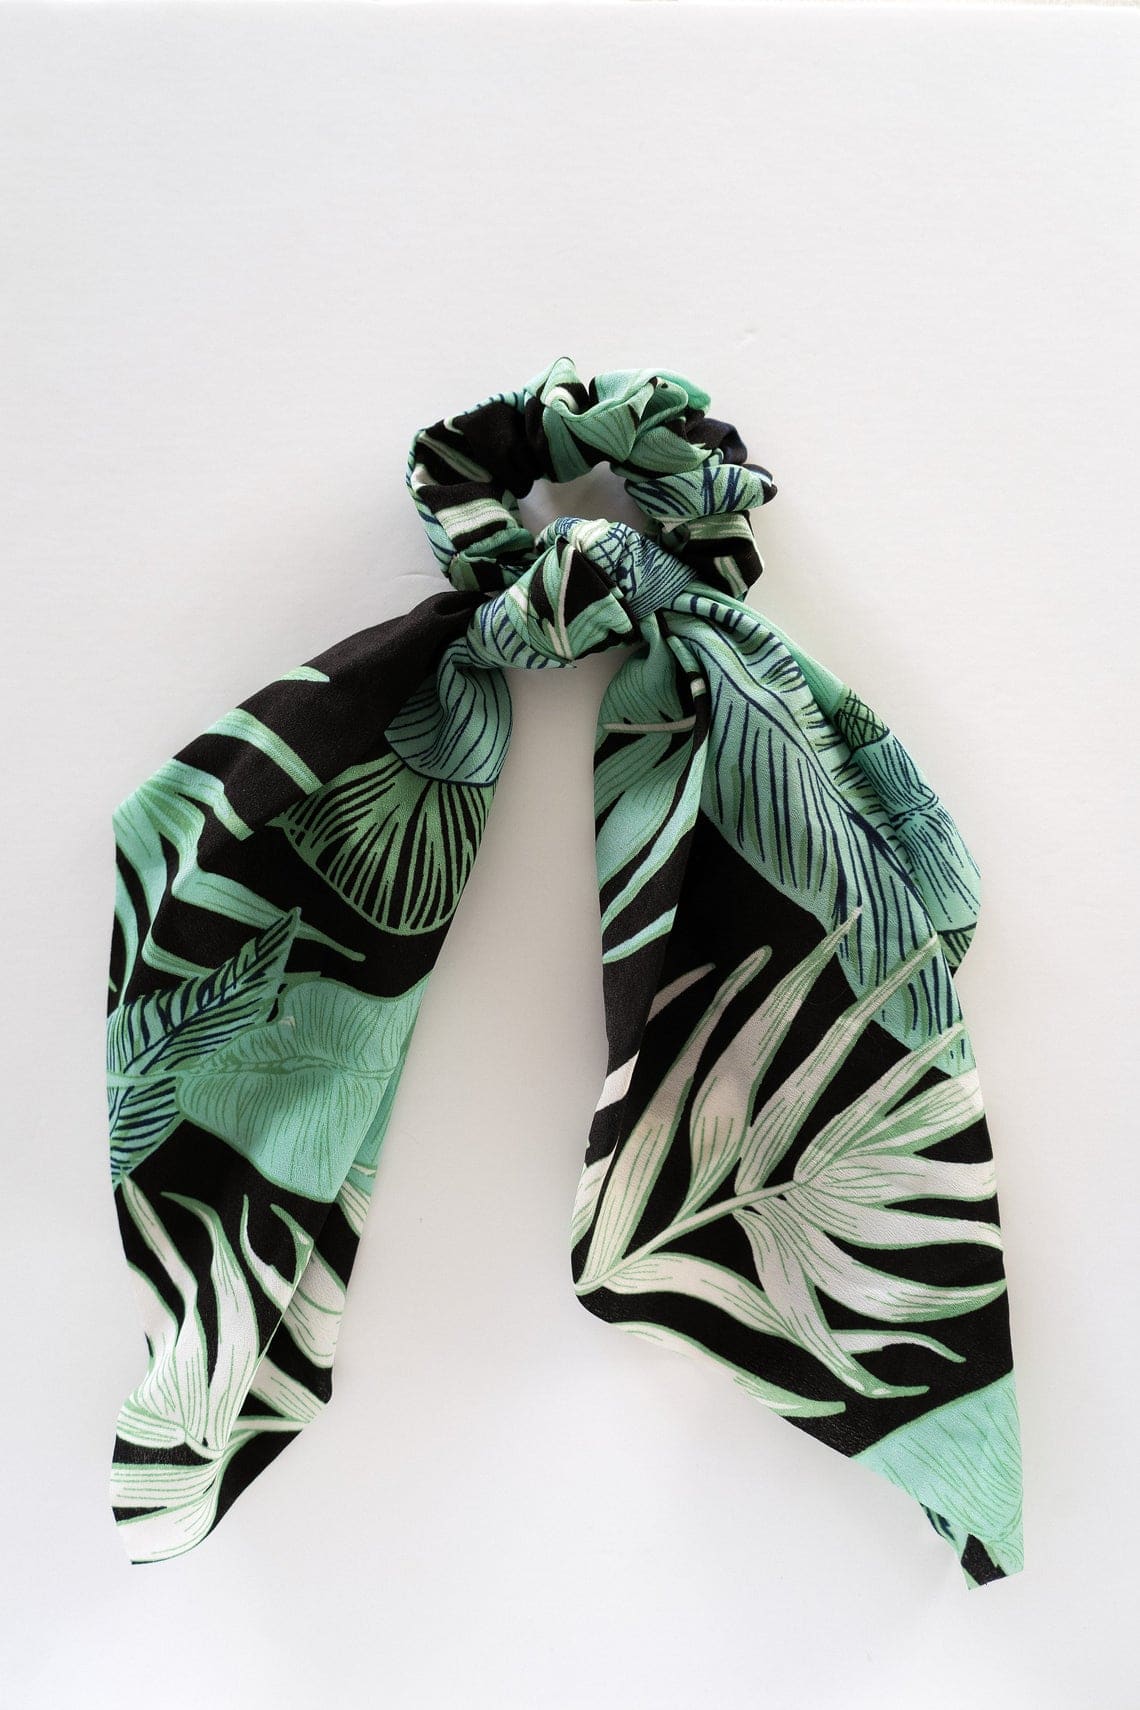 Scrunchie with "Tropical" scarf detail | various patterns